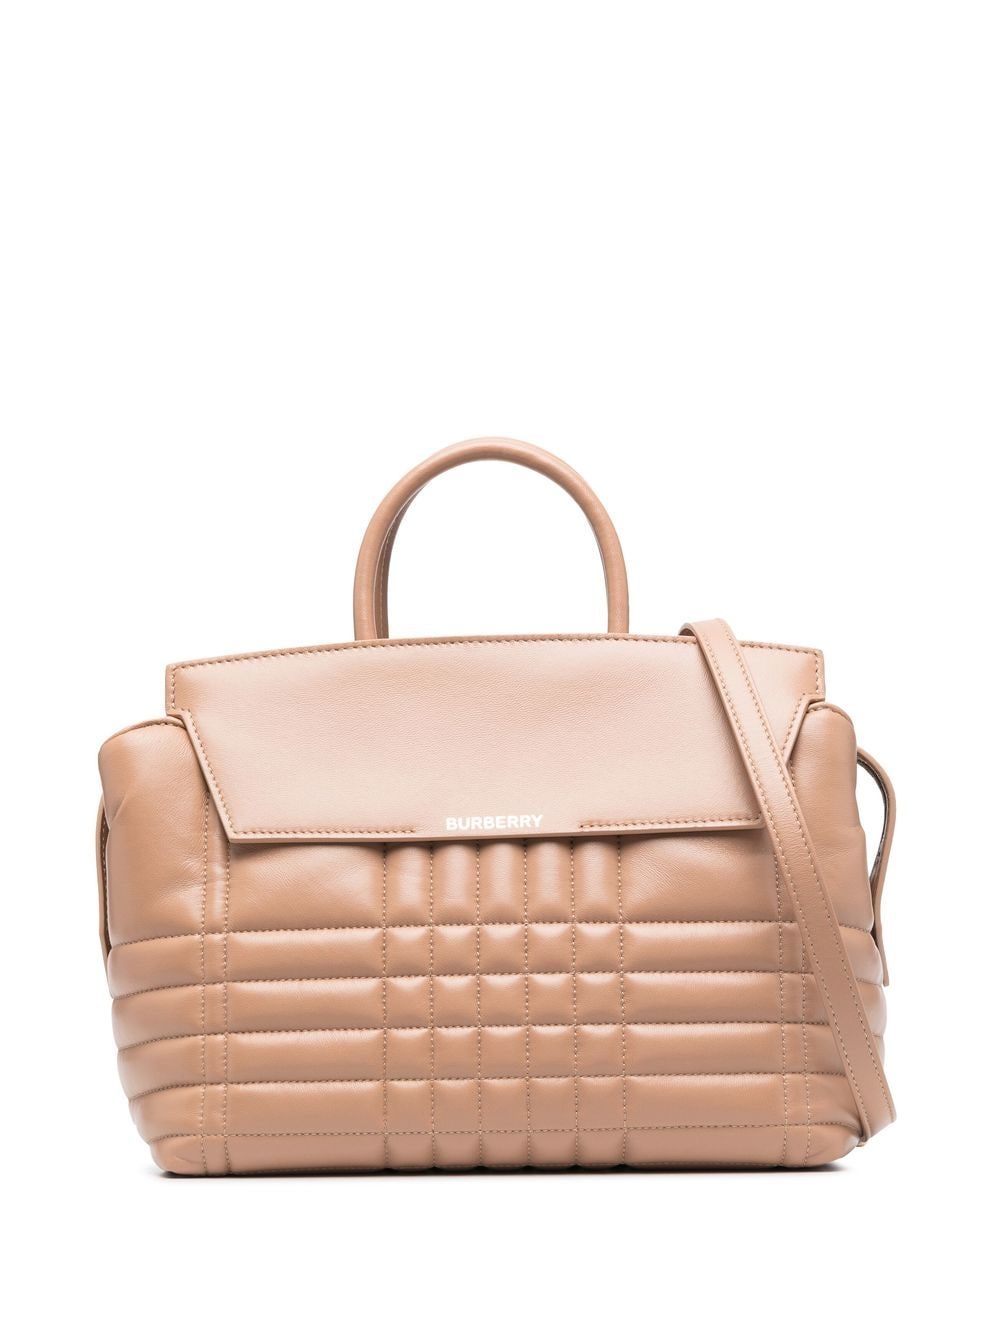 Burberry medium Catherine quilted tote bag - Neutrals